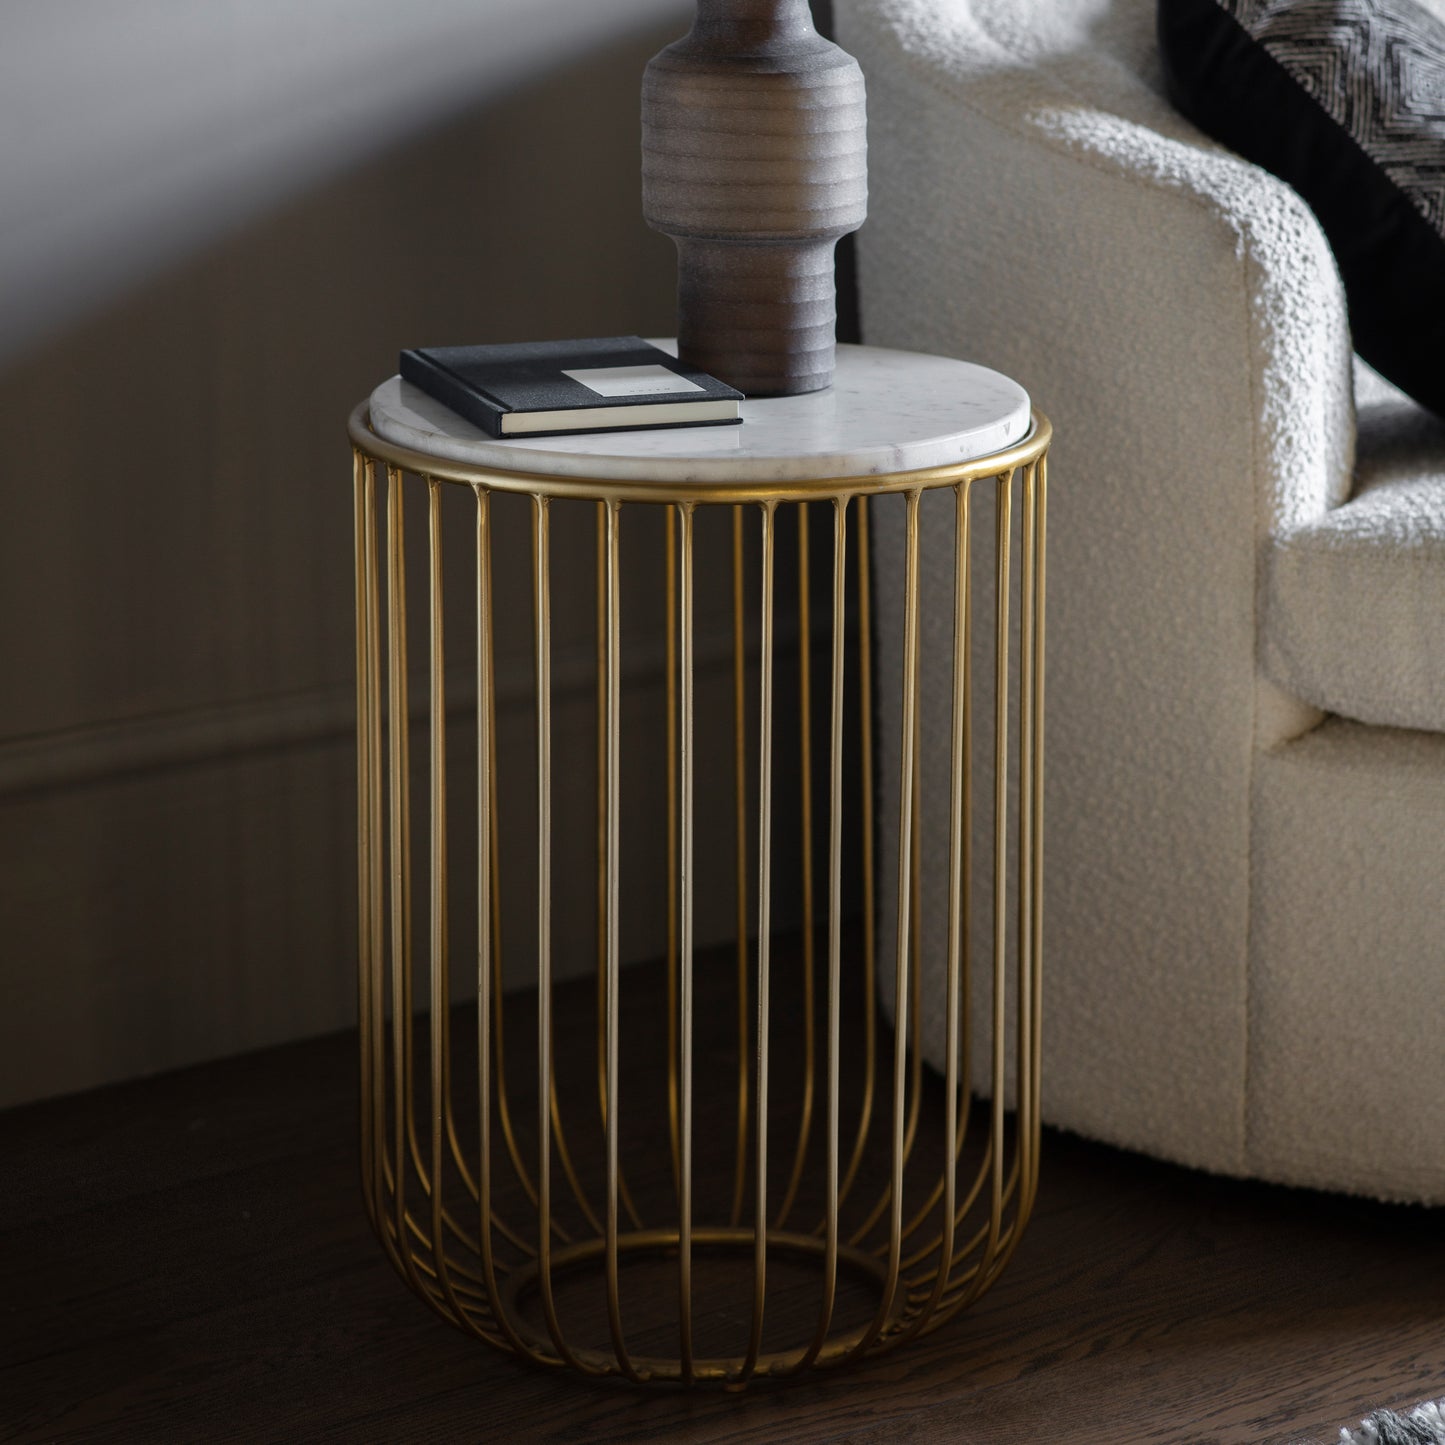 A gold Riley side table by Kikiathome.co.uk, perfect for interior decor and showcasing a vase.